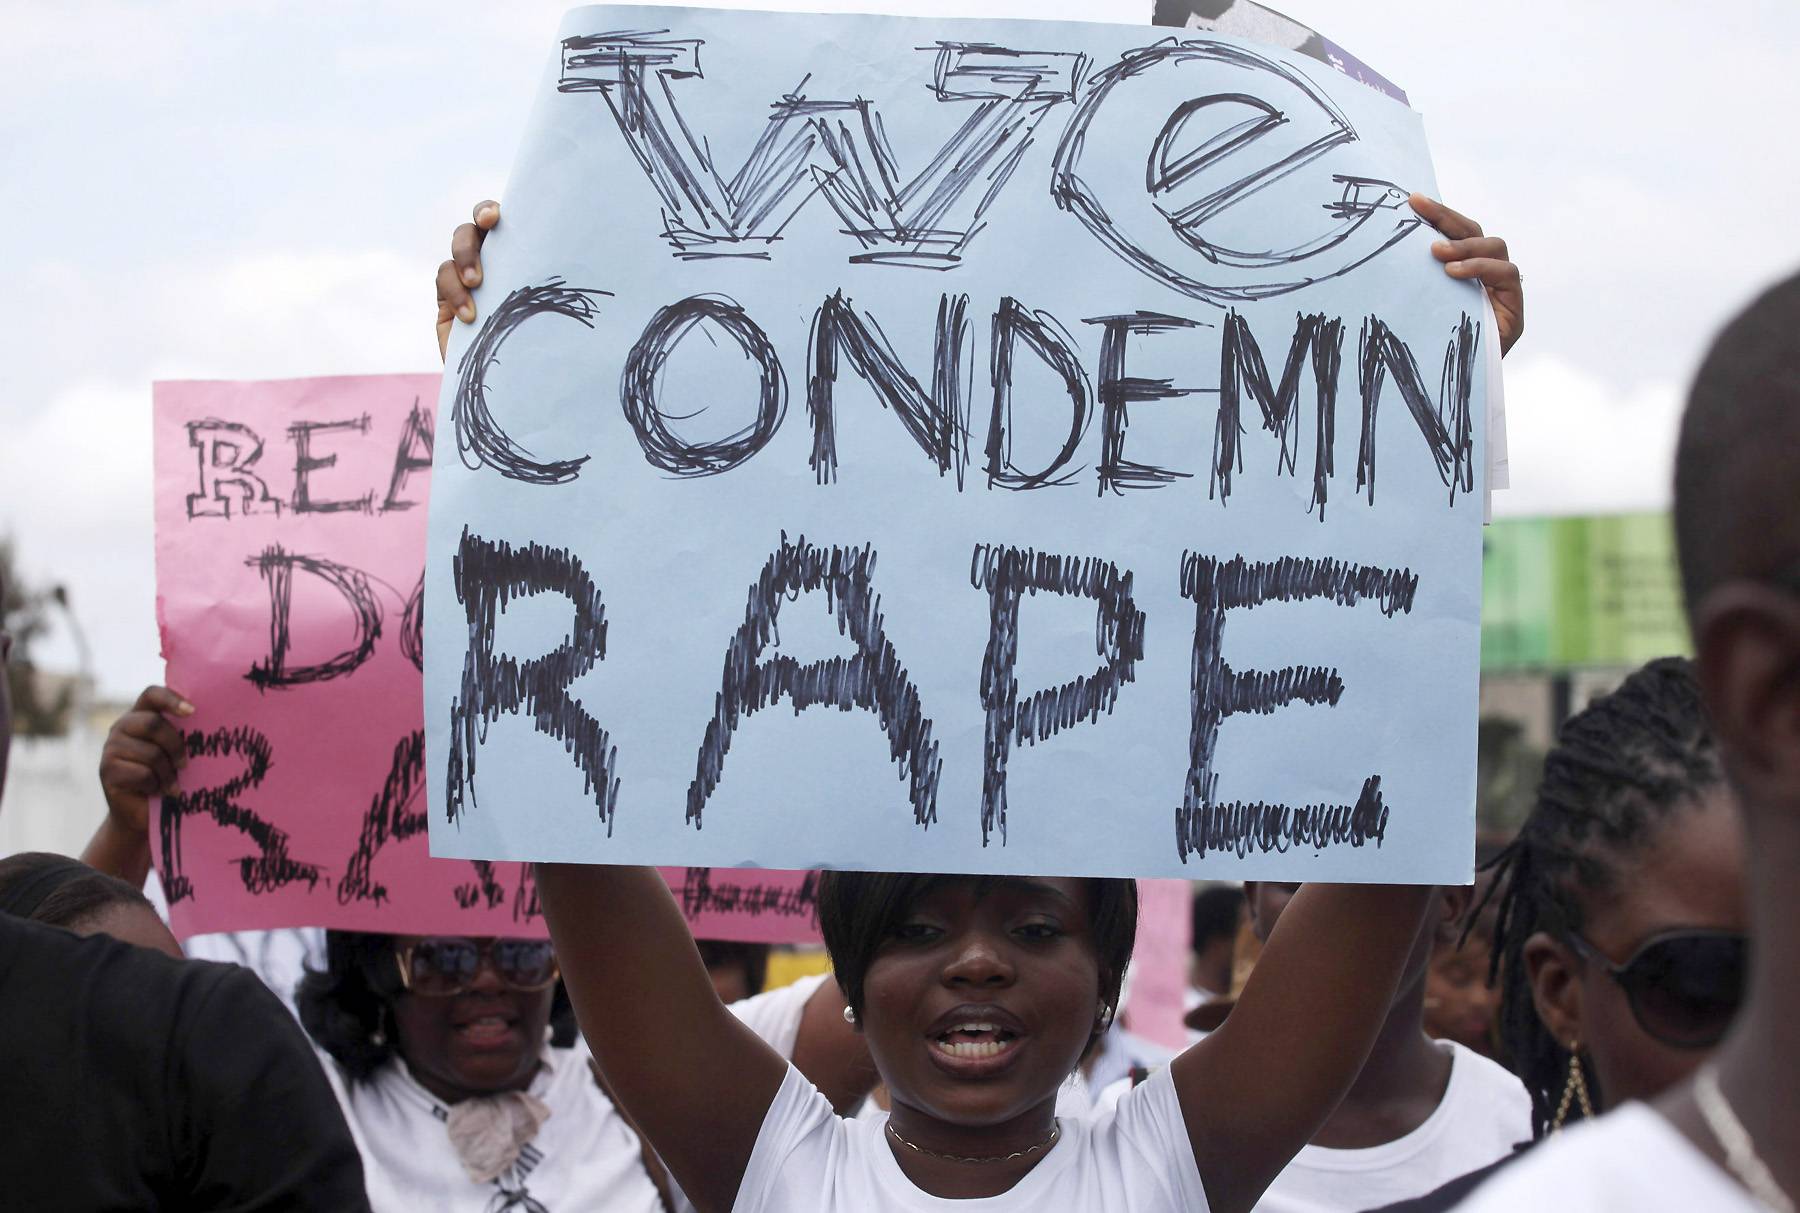 Obama Administration Redefines “Rape” - On Jan. 6, the Obama Administration expanded the definition of rape to include men as victims for the first time, in addition to instances where the victim is incapable of giving consent. (Photo: REUTERS/Akintunde Akinleye)